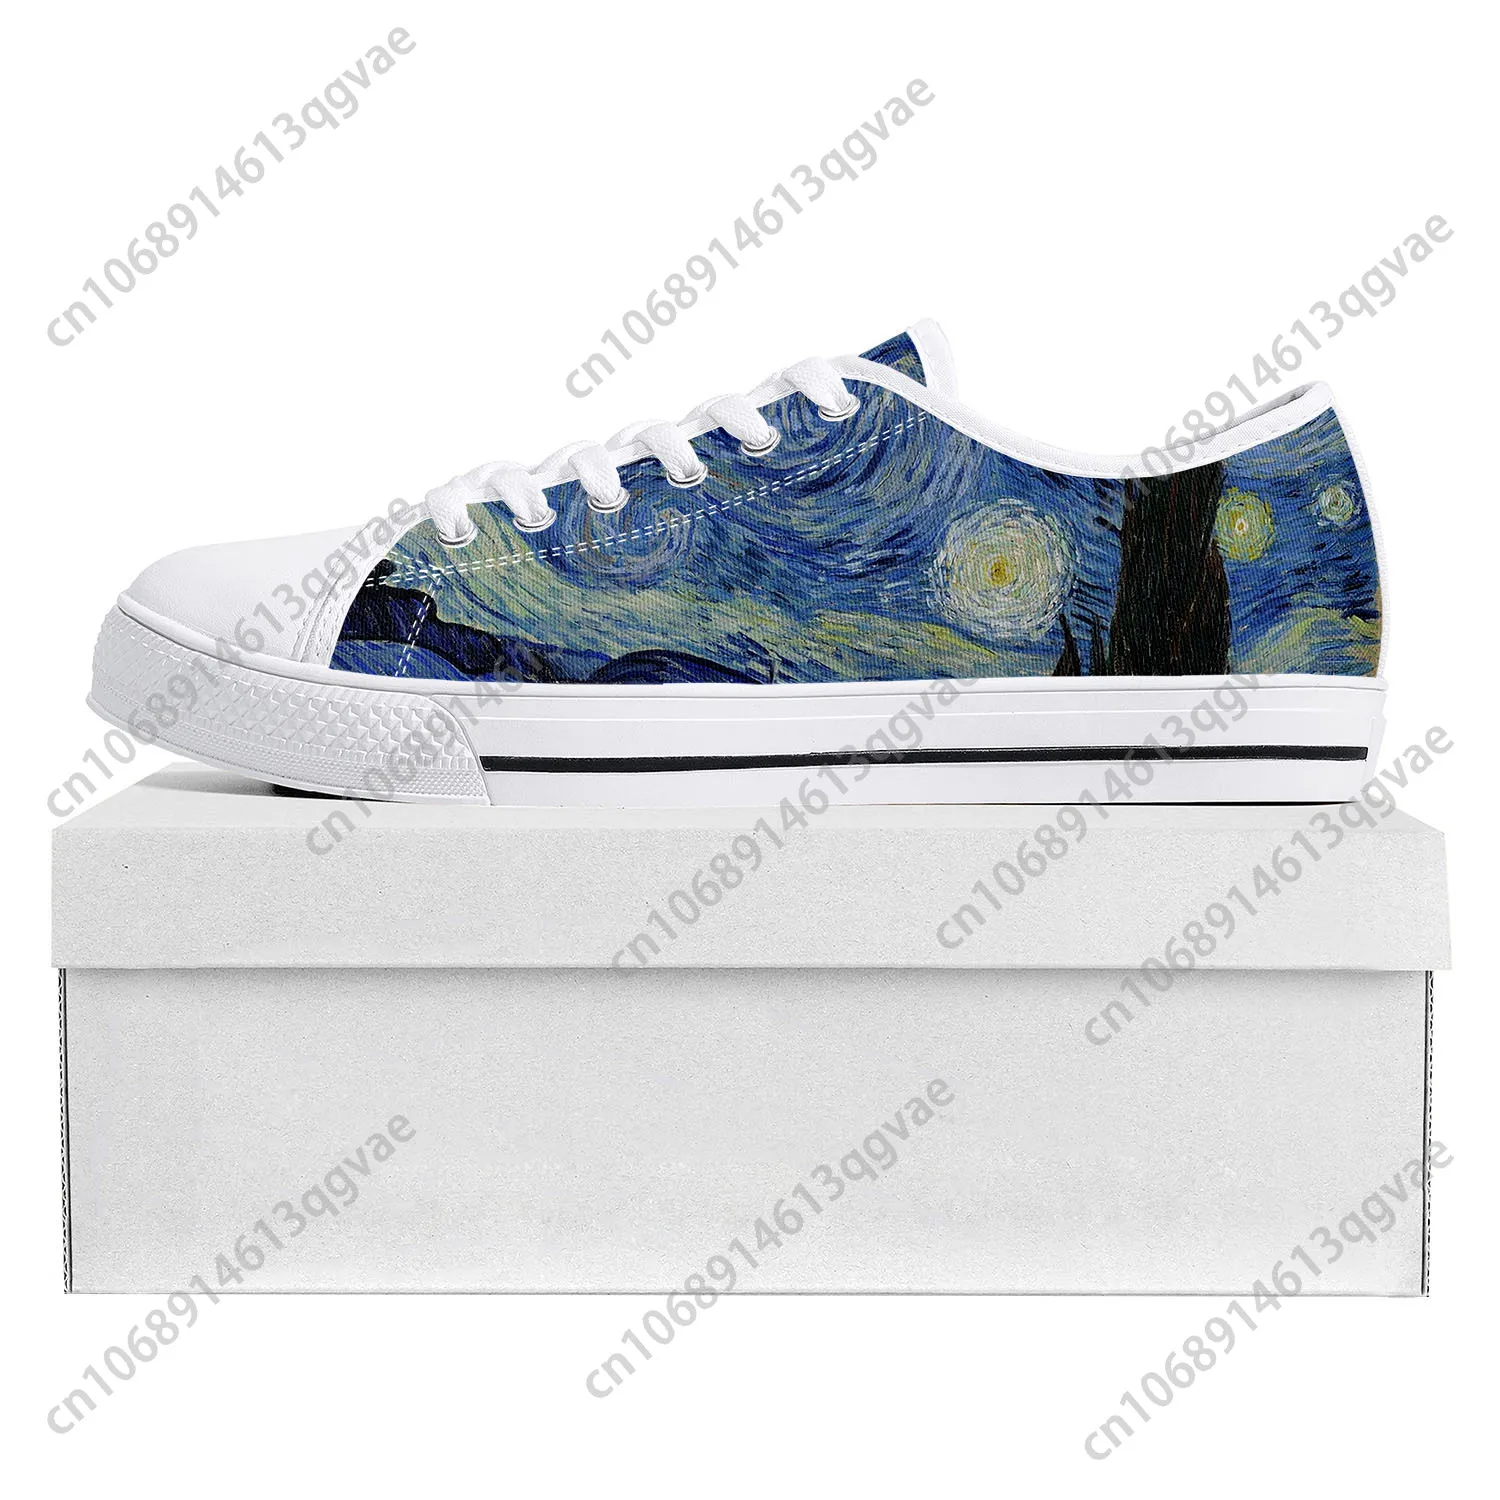 

Van Gogh Oil Paint Starry Night Low Top High Quality Sports Shoes Men Ladies Teenagers Canvas Shoes Couple Custom Shoes